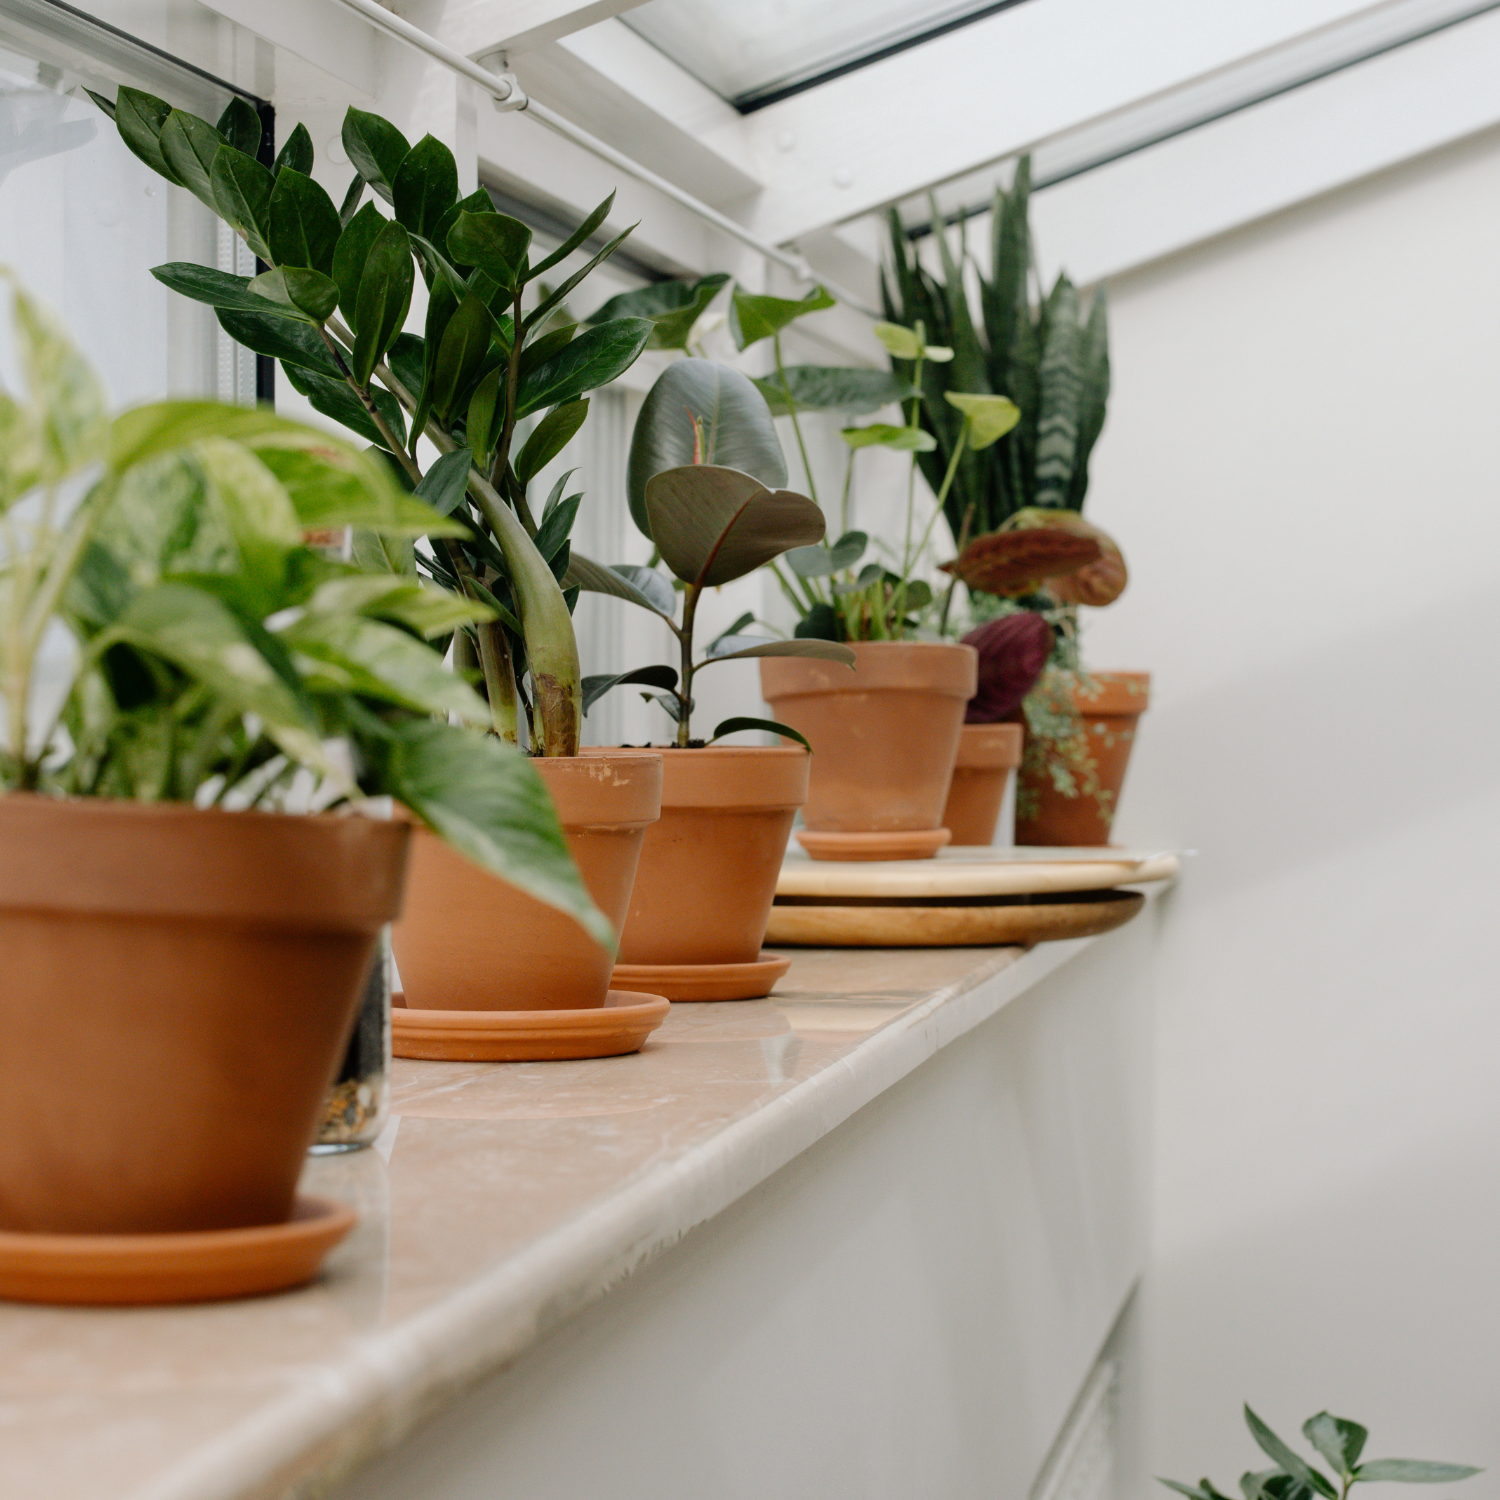 "Photo of indoor plants including a snake plant, a pothos, and a spider plant. These plants have various shapes and sizes, with green leaves and some with white accents.